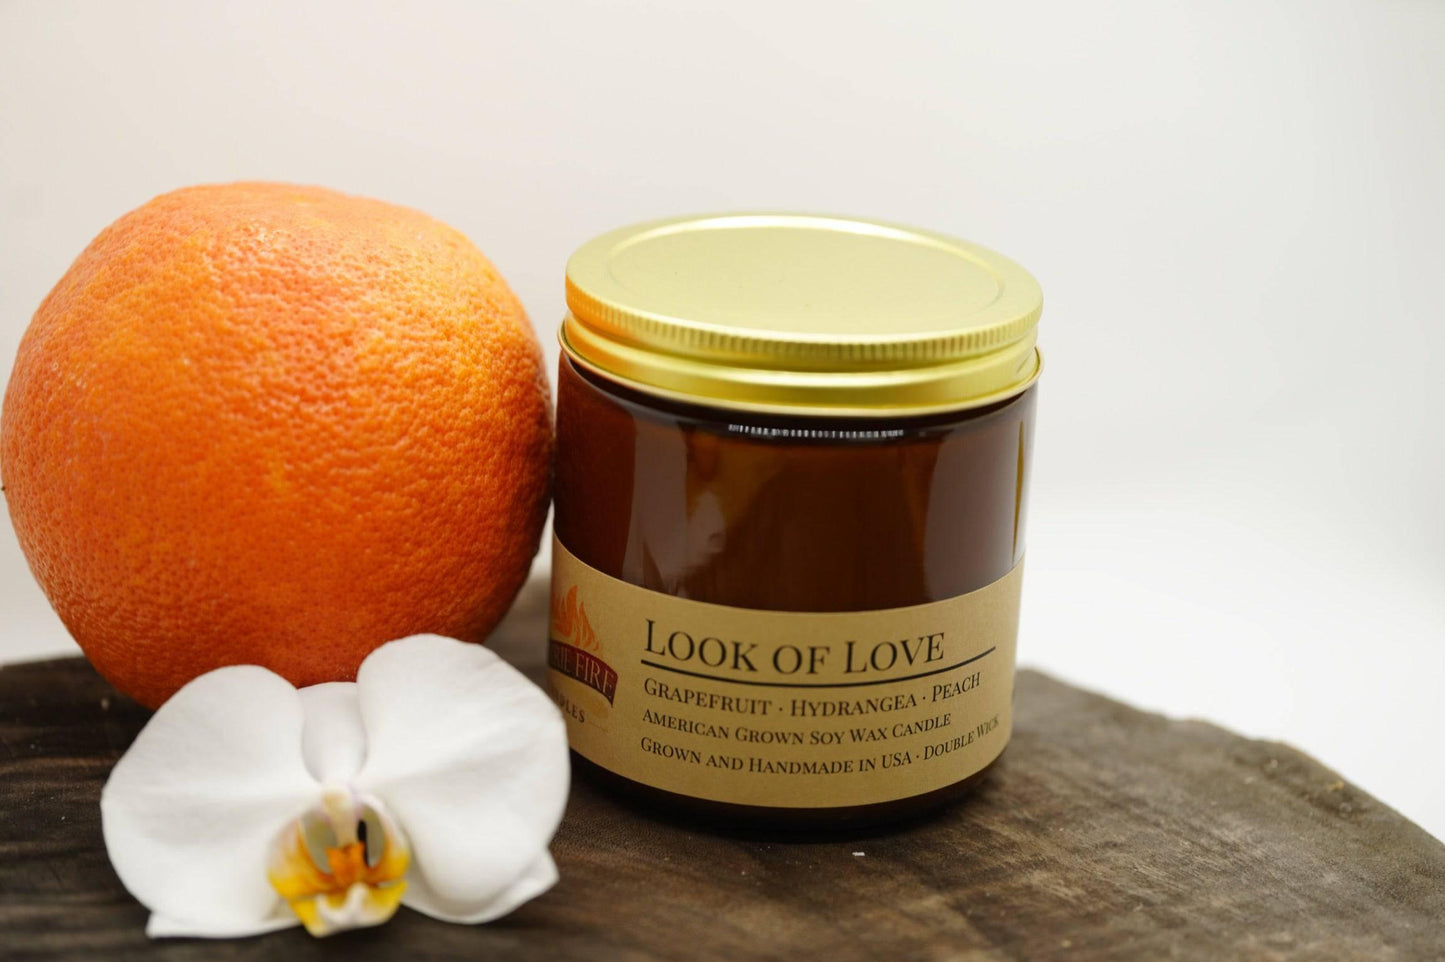 look of love soy wax candle | 16 oz double wick amber apothecary jar by prairie fire tallow, candles, and lavender